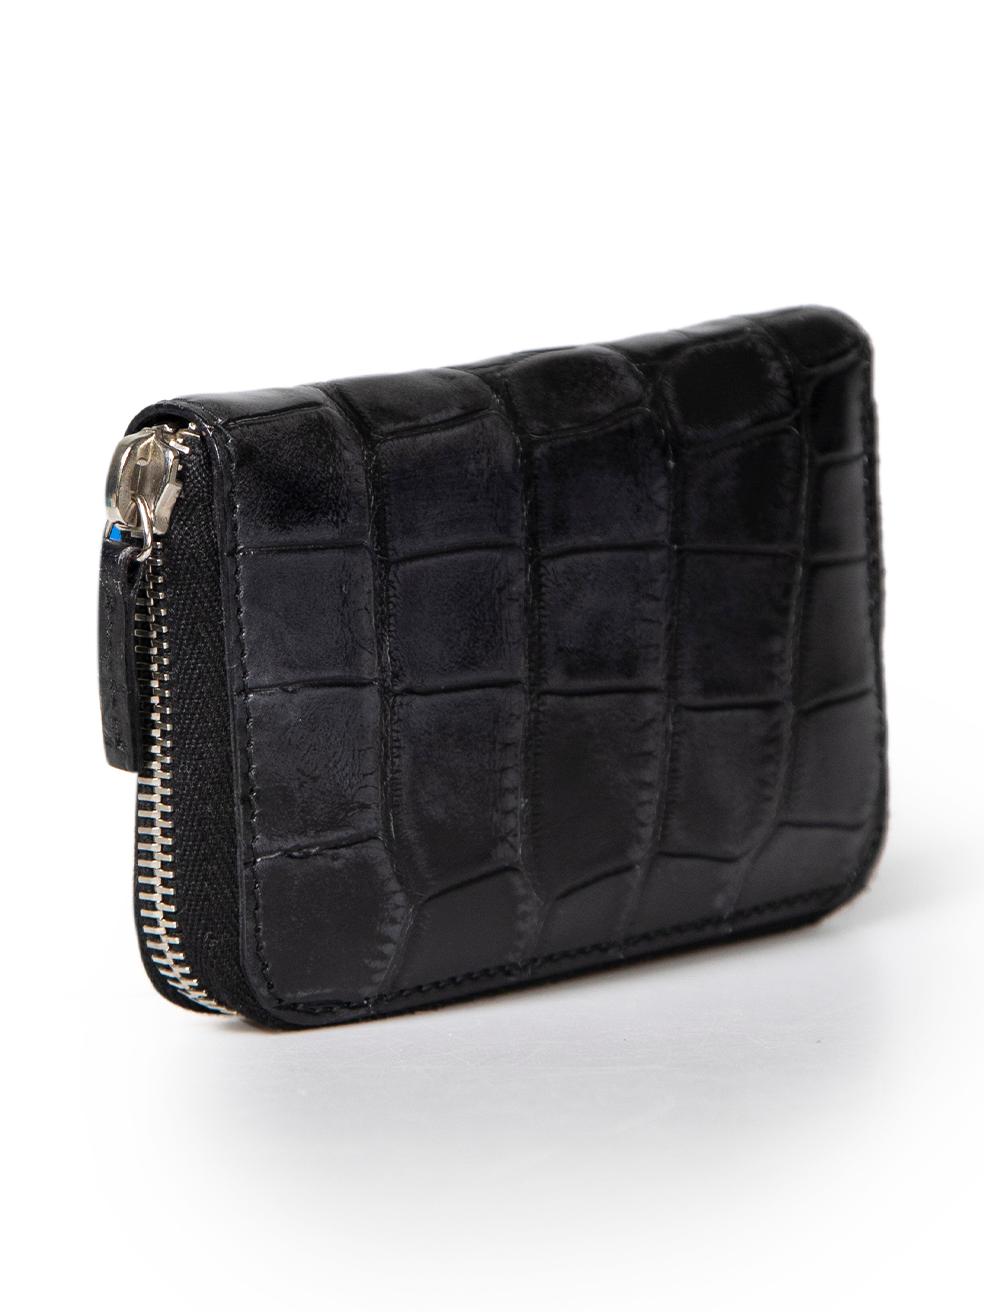 CONDITION is Good. Minor wear to wallet is evident. Light wear to the exterior with mild abrasion of the leather surface seen throughout. The zip tape also shows signs of wear on this used Gucci designer resale item.
 
 
 
 Details
 
 
 Black
 
